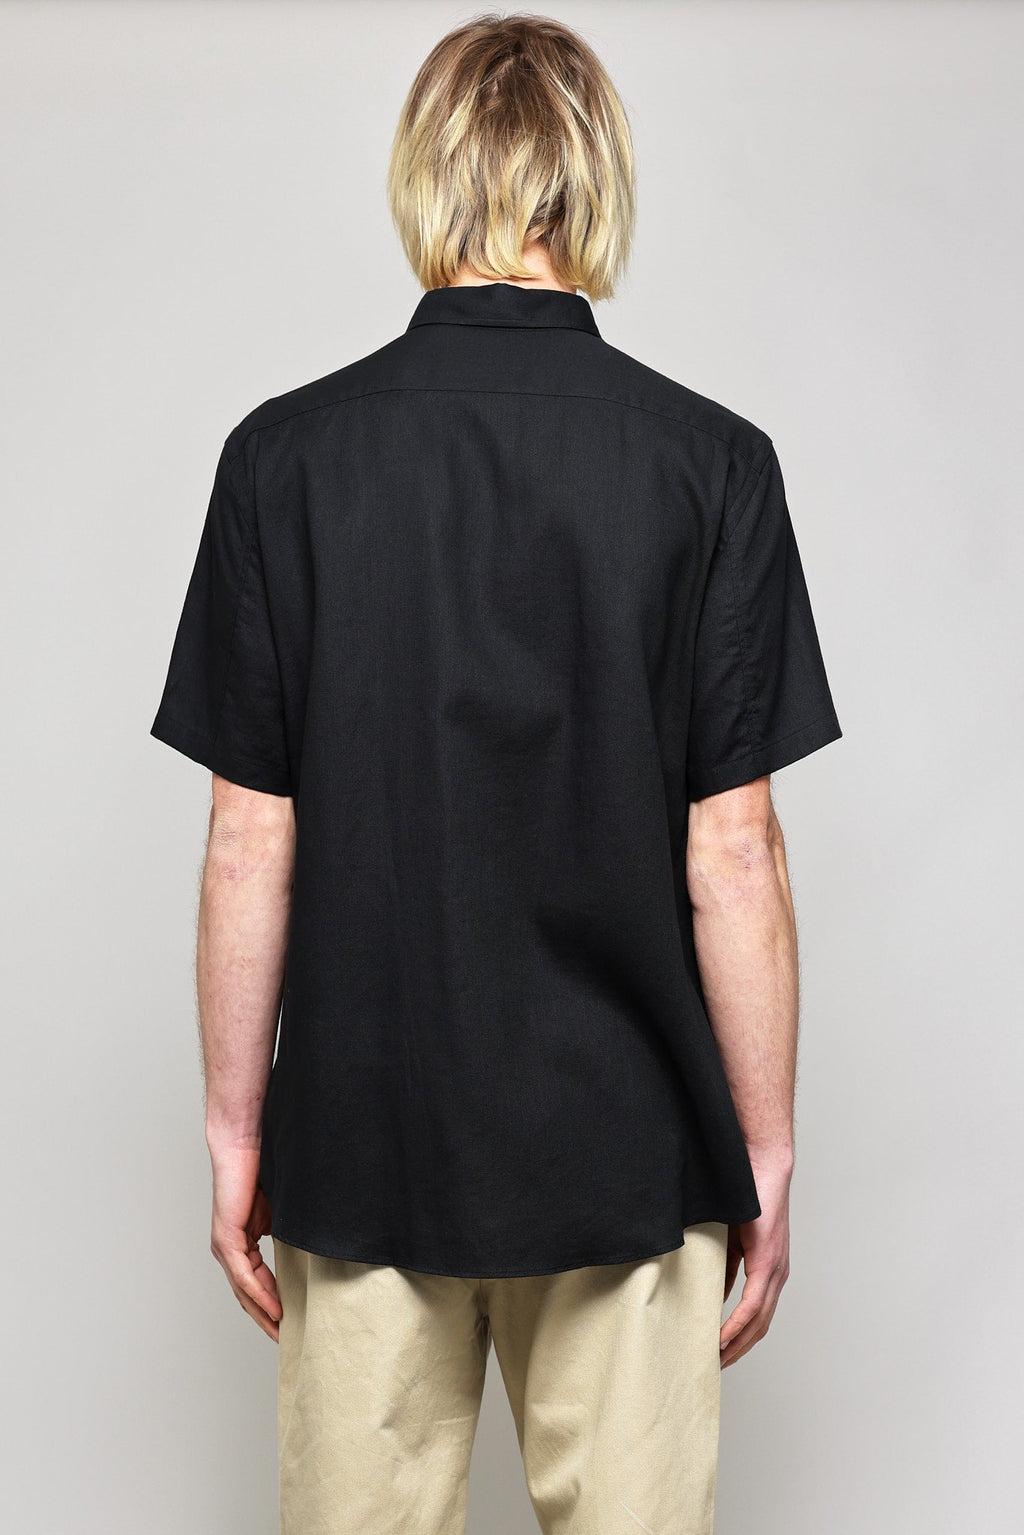 Japanese Dyed Twill in Black 03